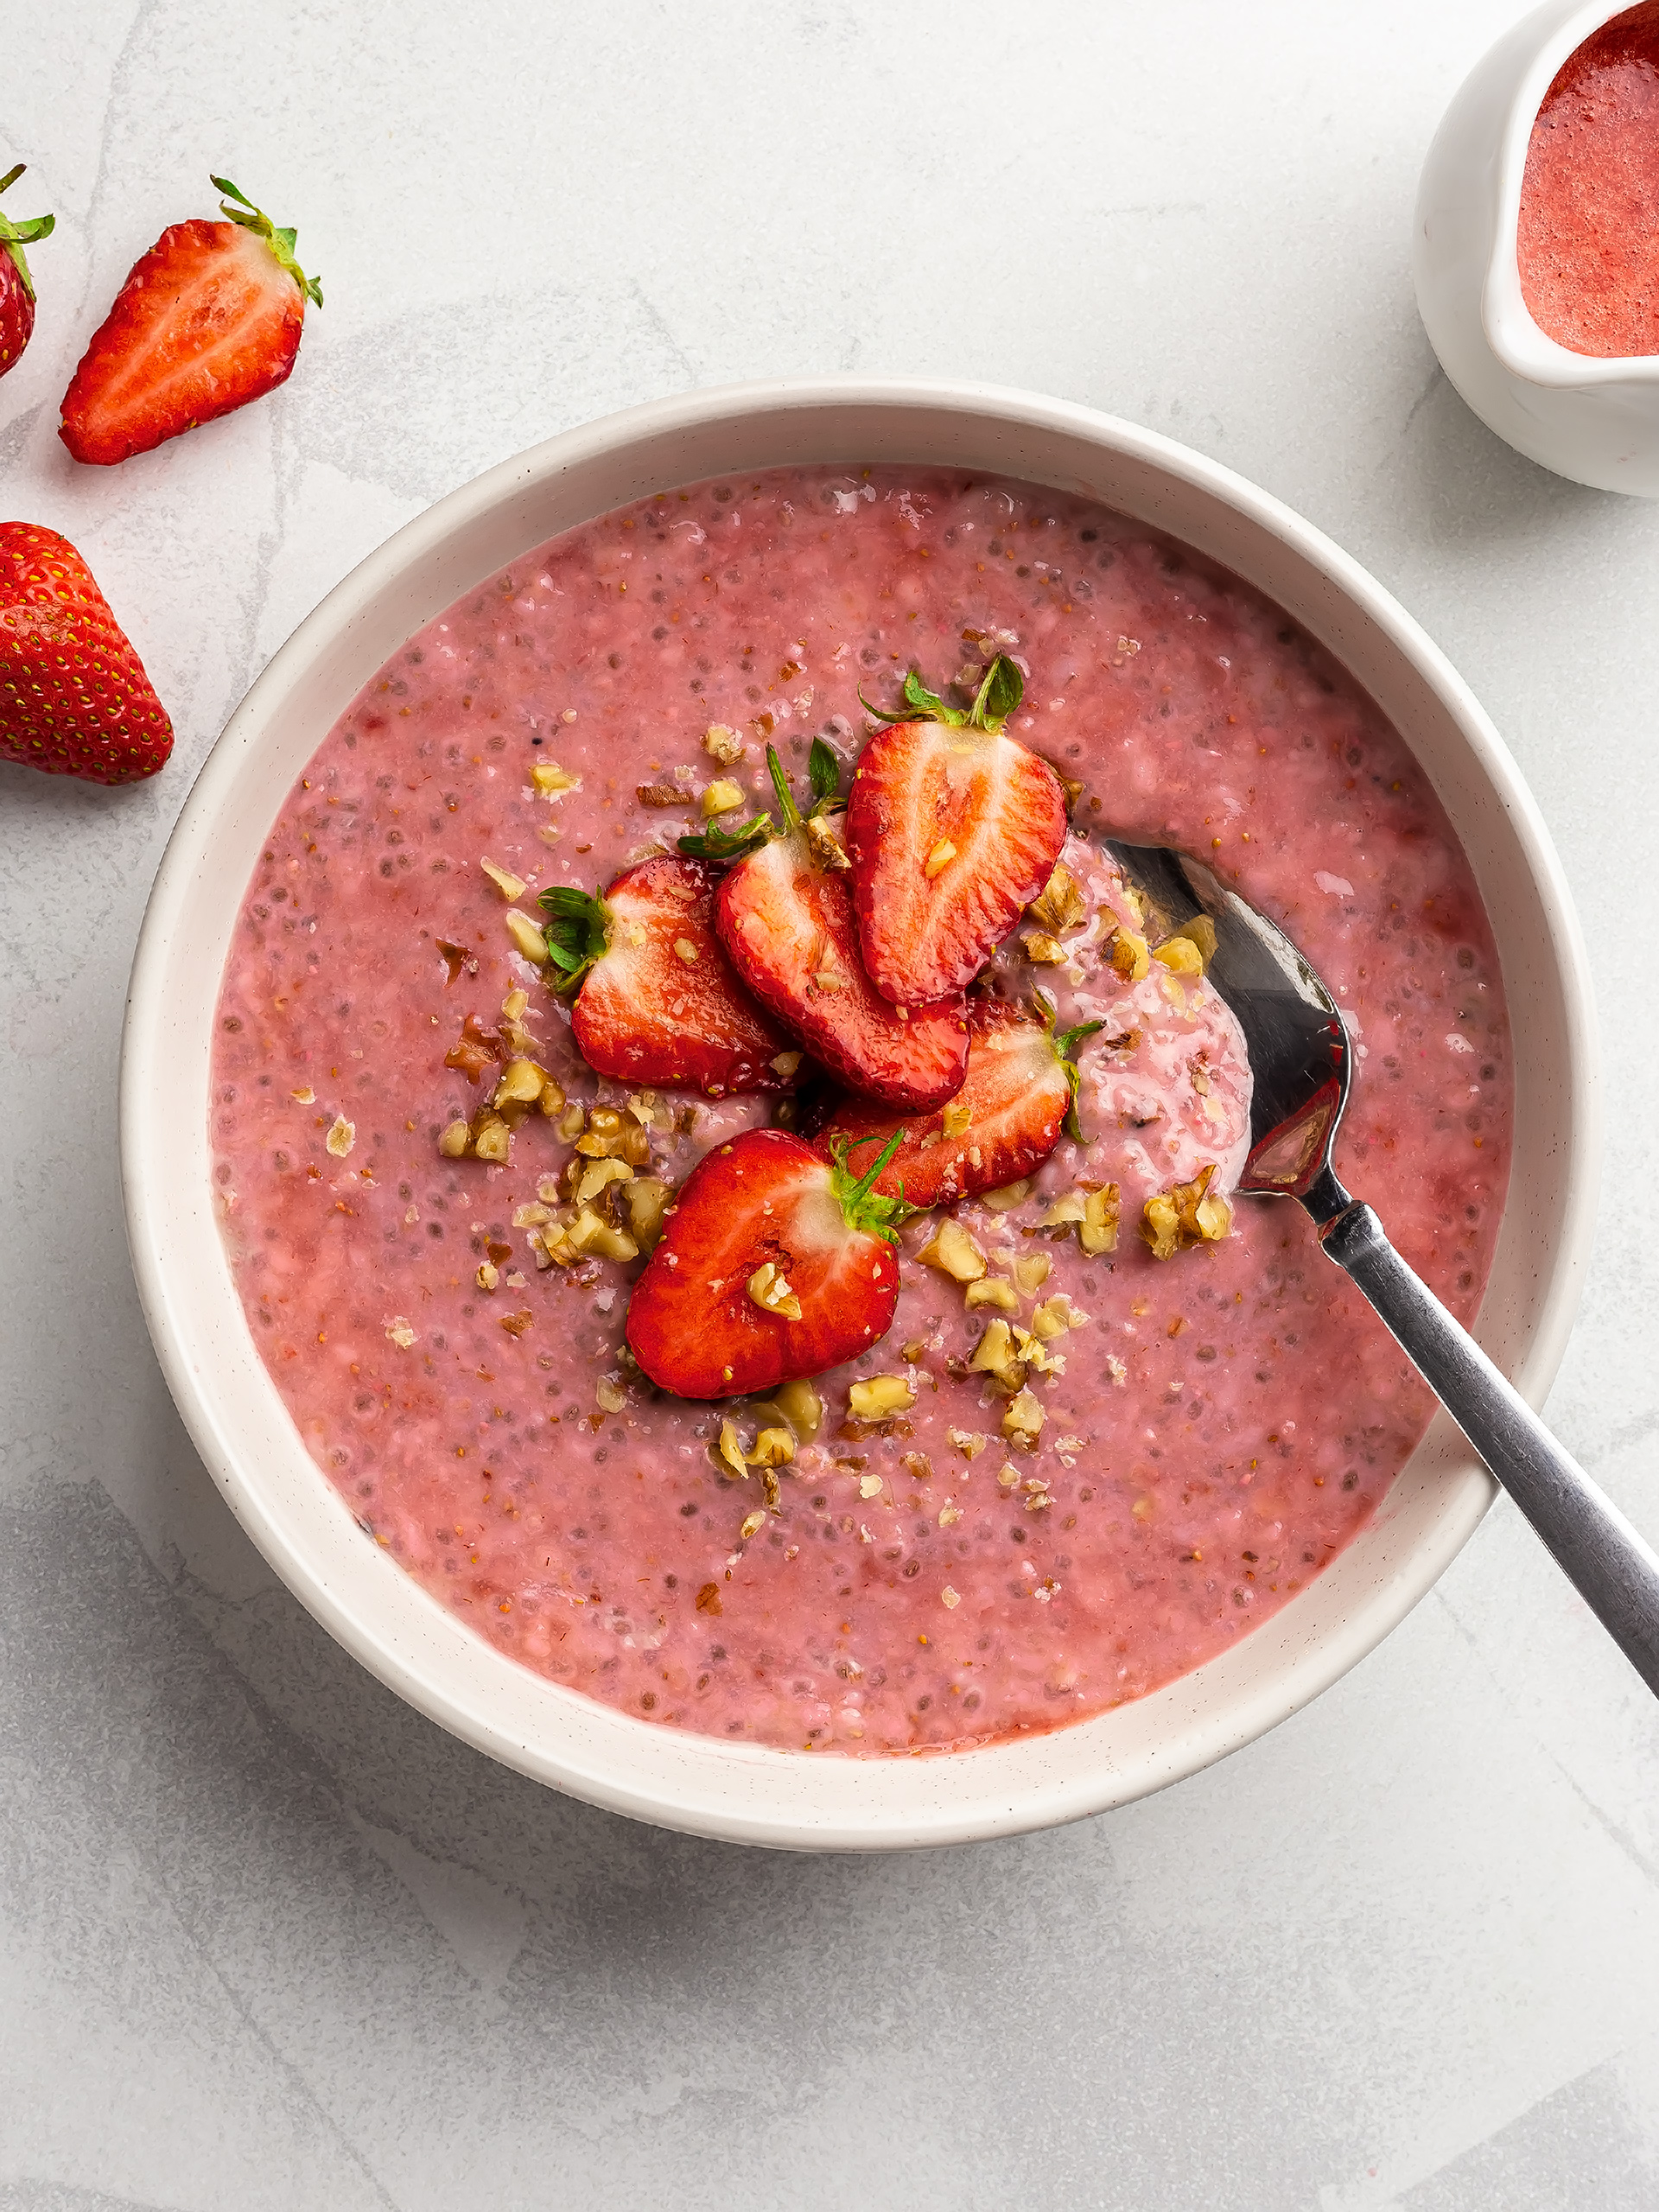 Low FODMAP Oatmeal with Strawberries